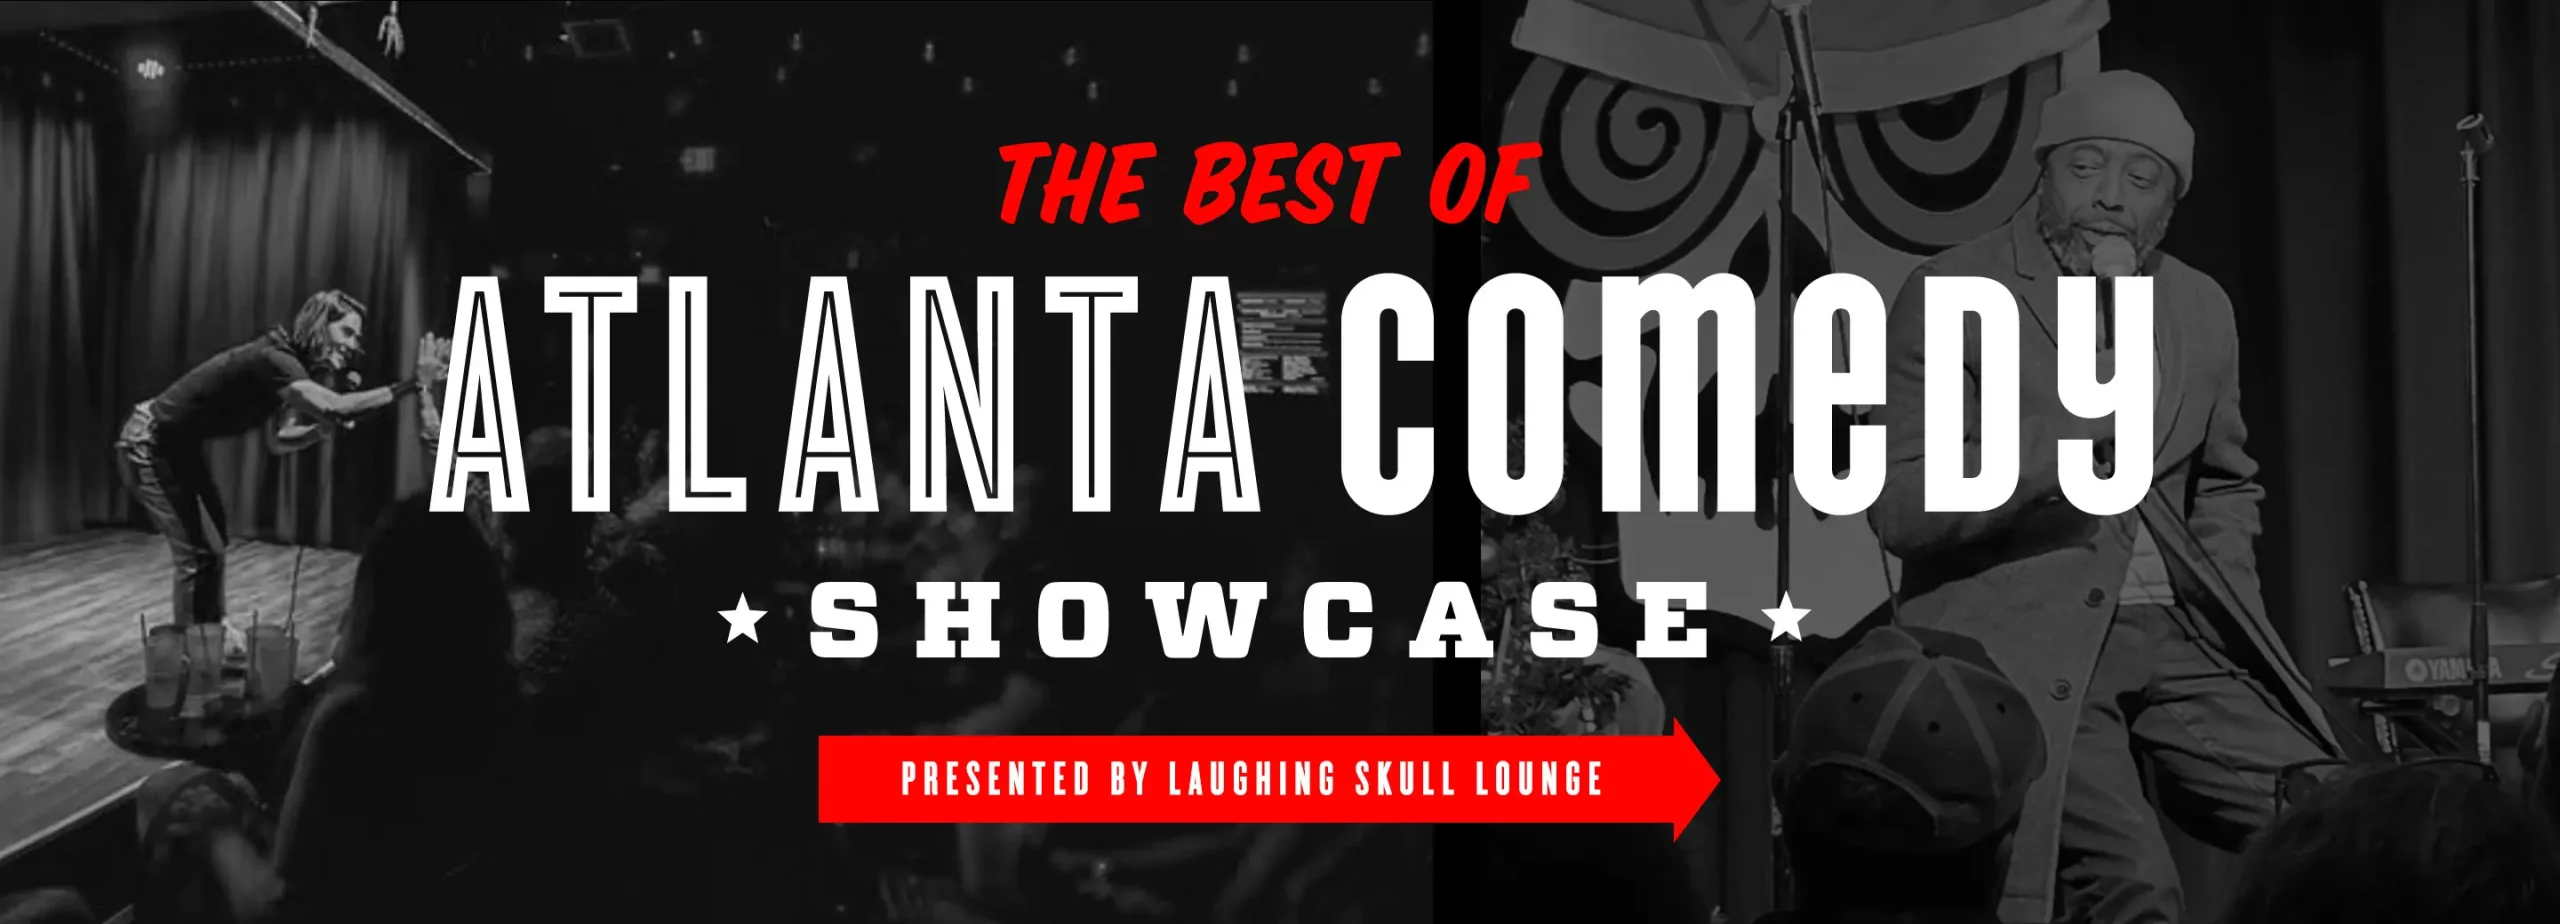 The Best of Atlanta Comedy Showcase at Laughing Skull Lounge